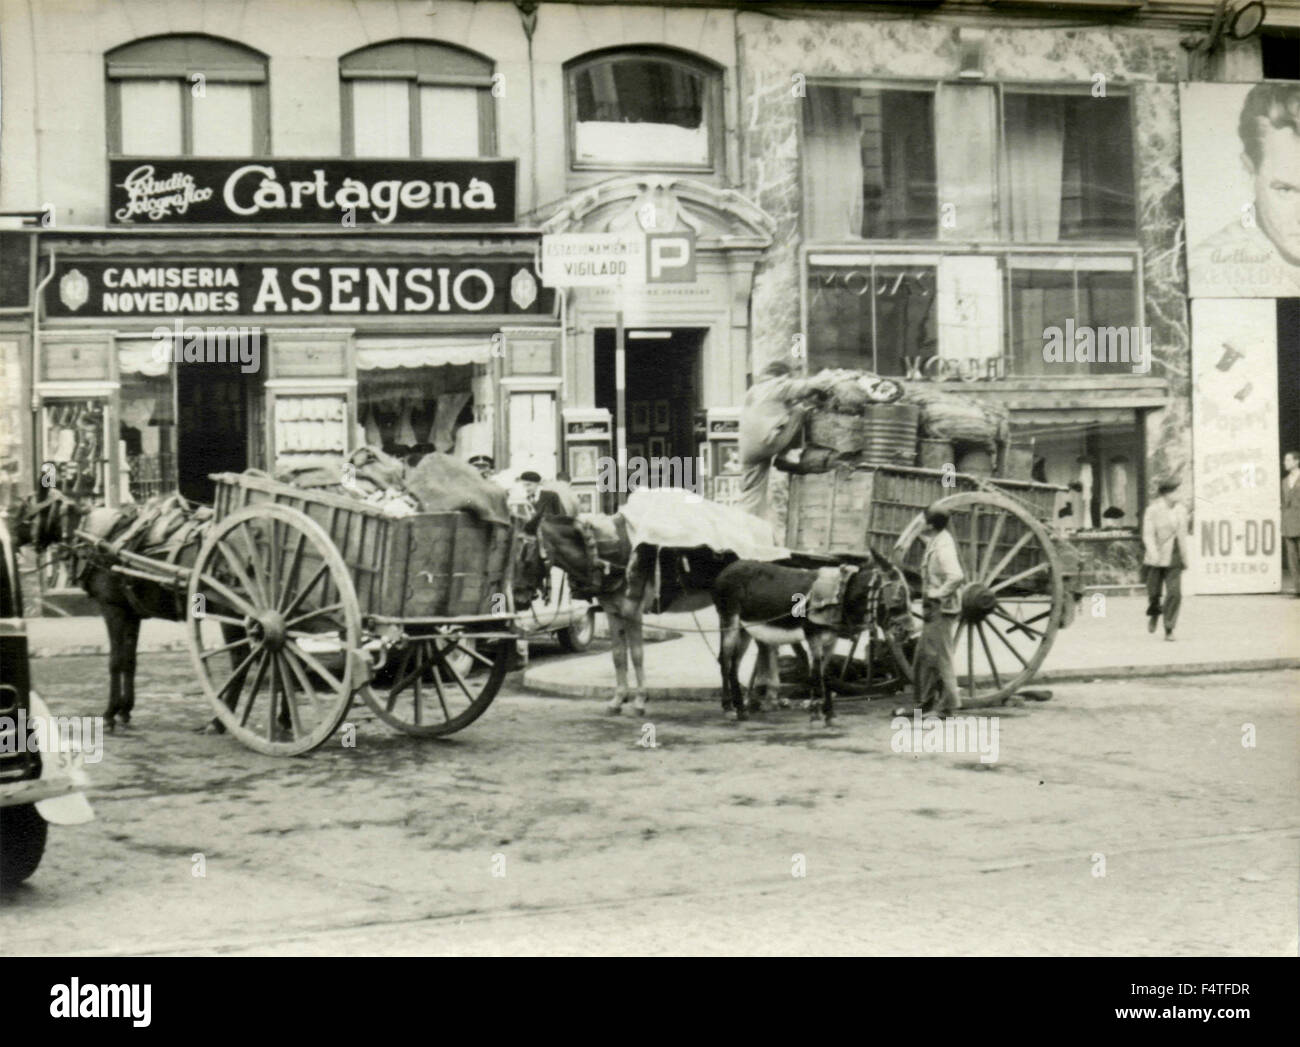 Two horse-drawn wagons carrying goods in Cartagena, Spain Stock Photo